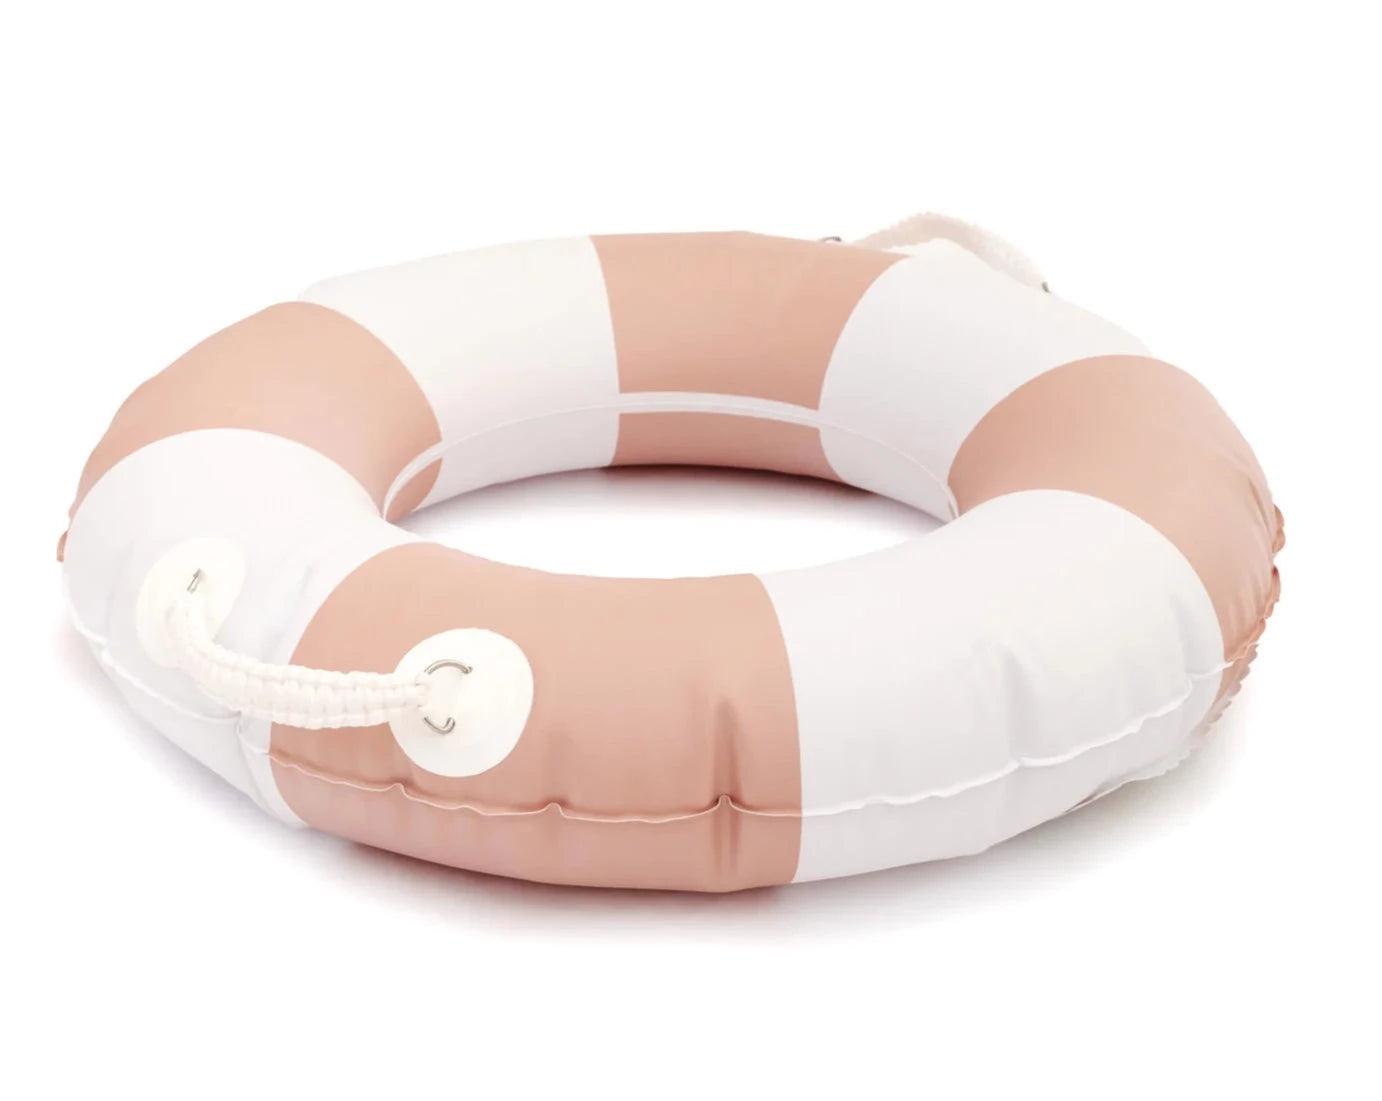 Small Classic Pool Float - Dusty Pink